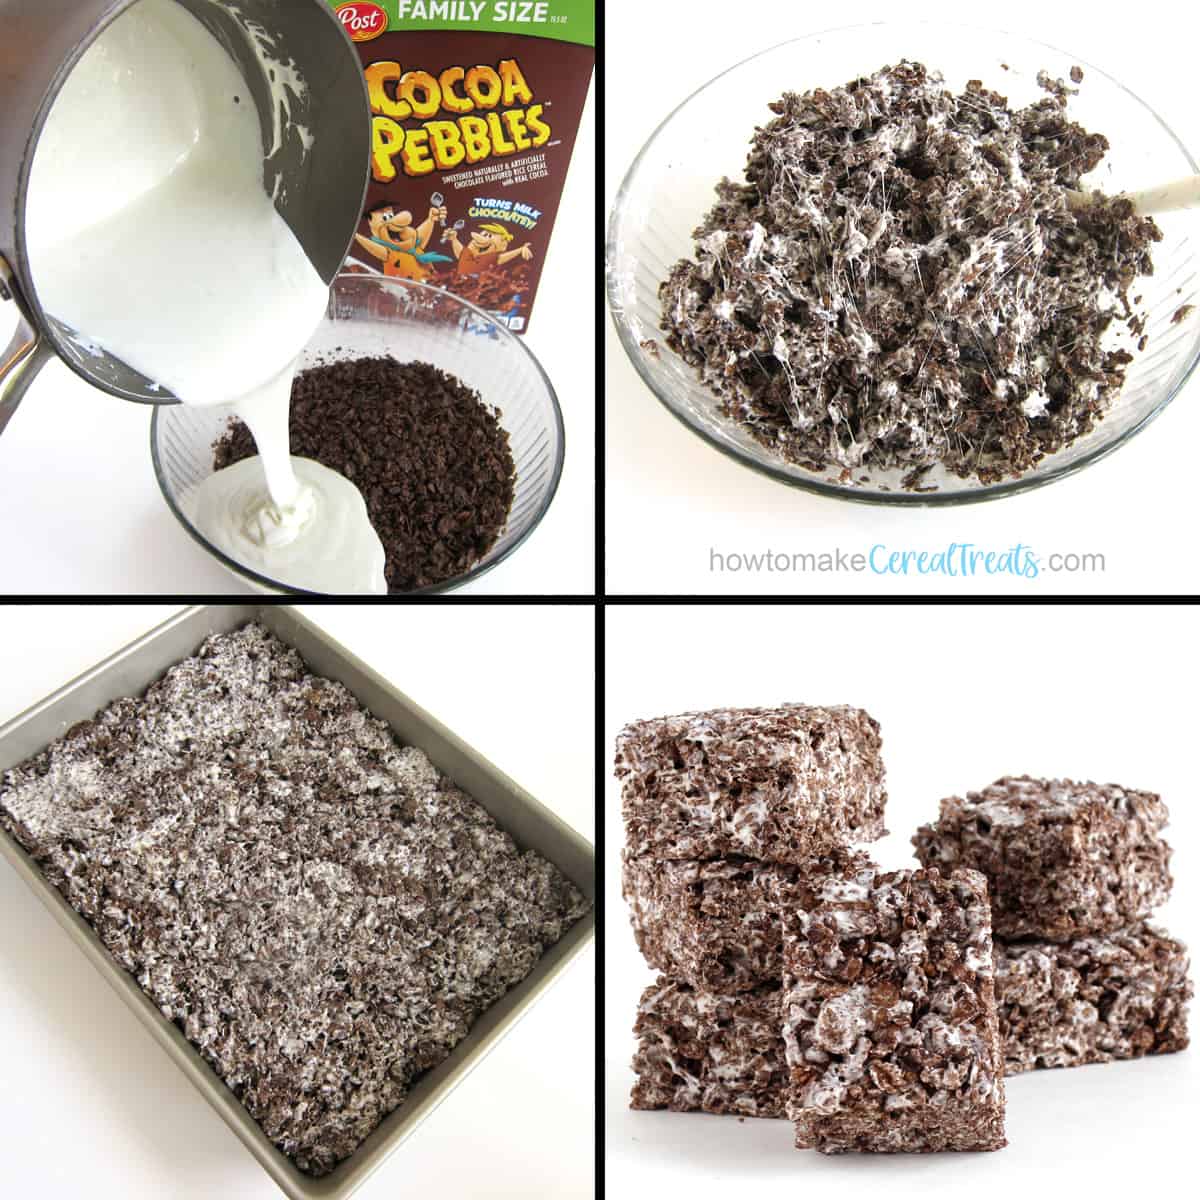 pour melted butter and marshmallows over Cocoa Pebbles to make cereal treats